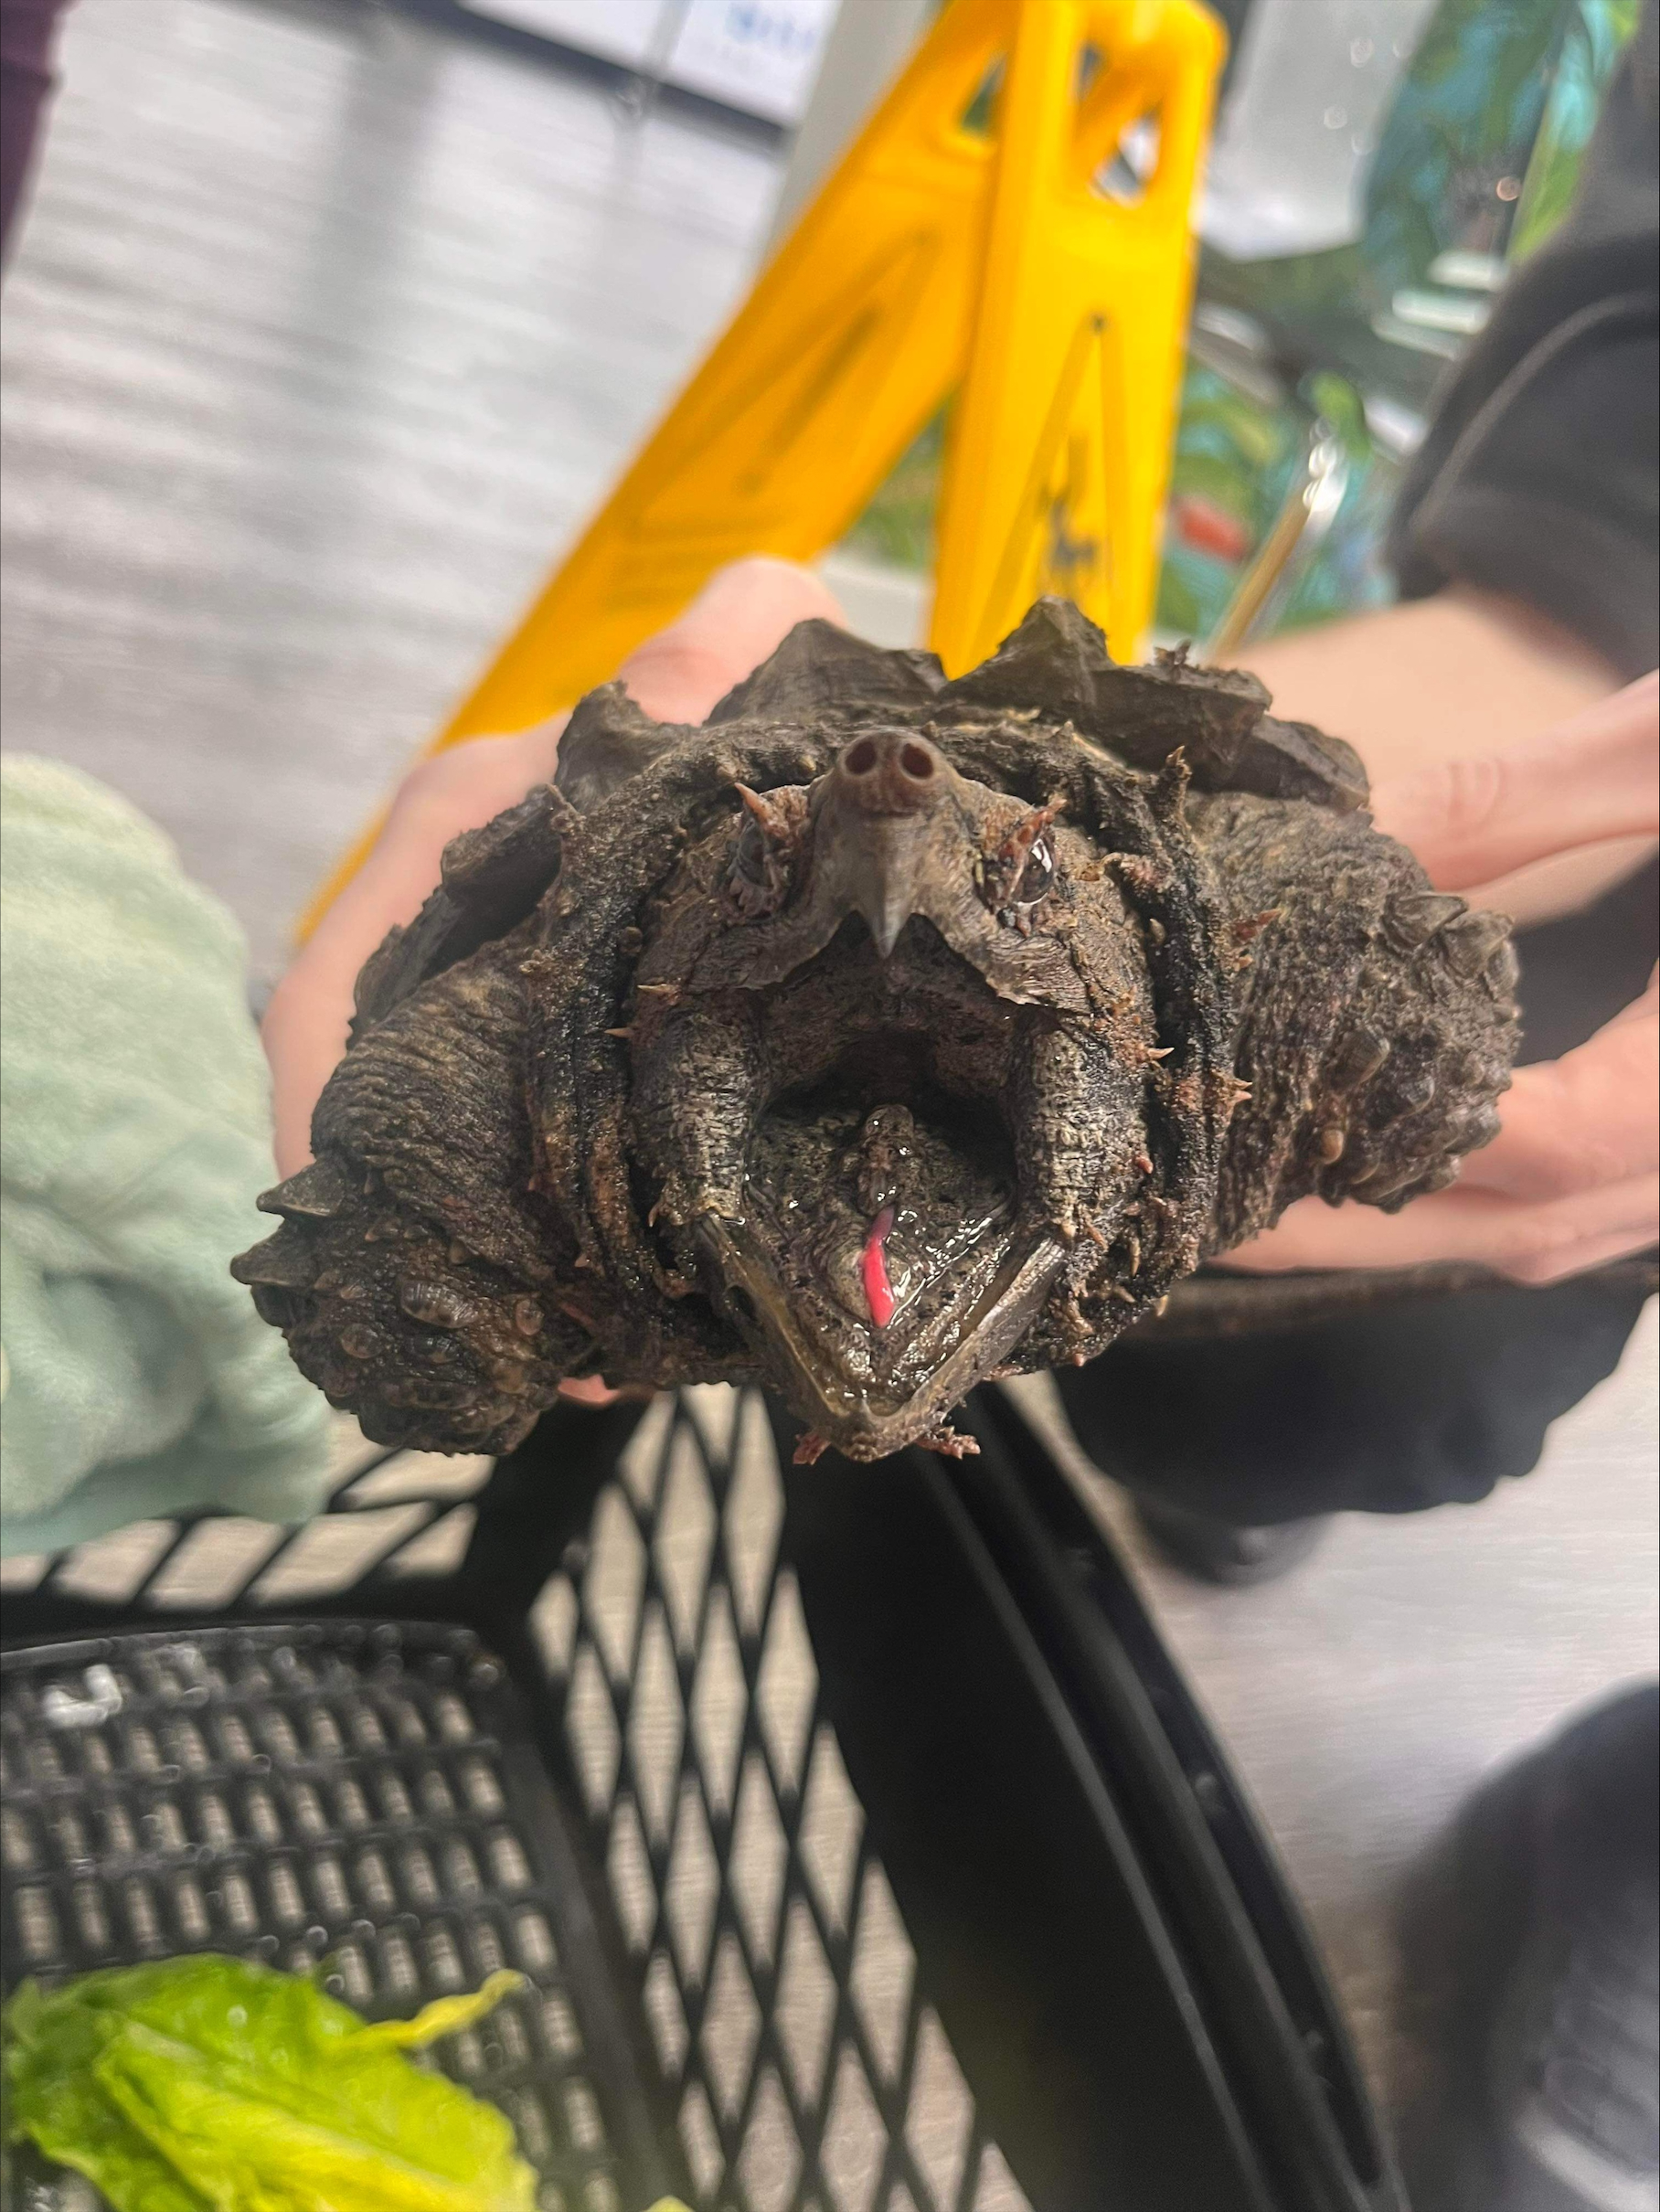 A photo of the alligator snapping turtle with its mouth open